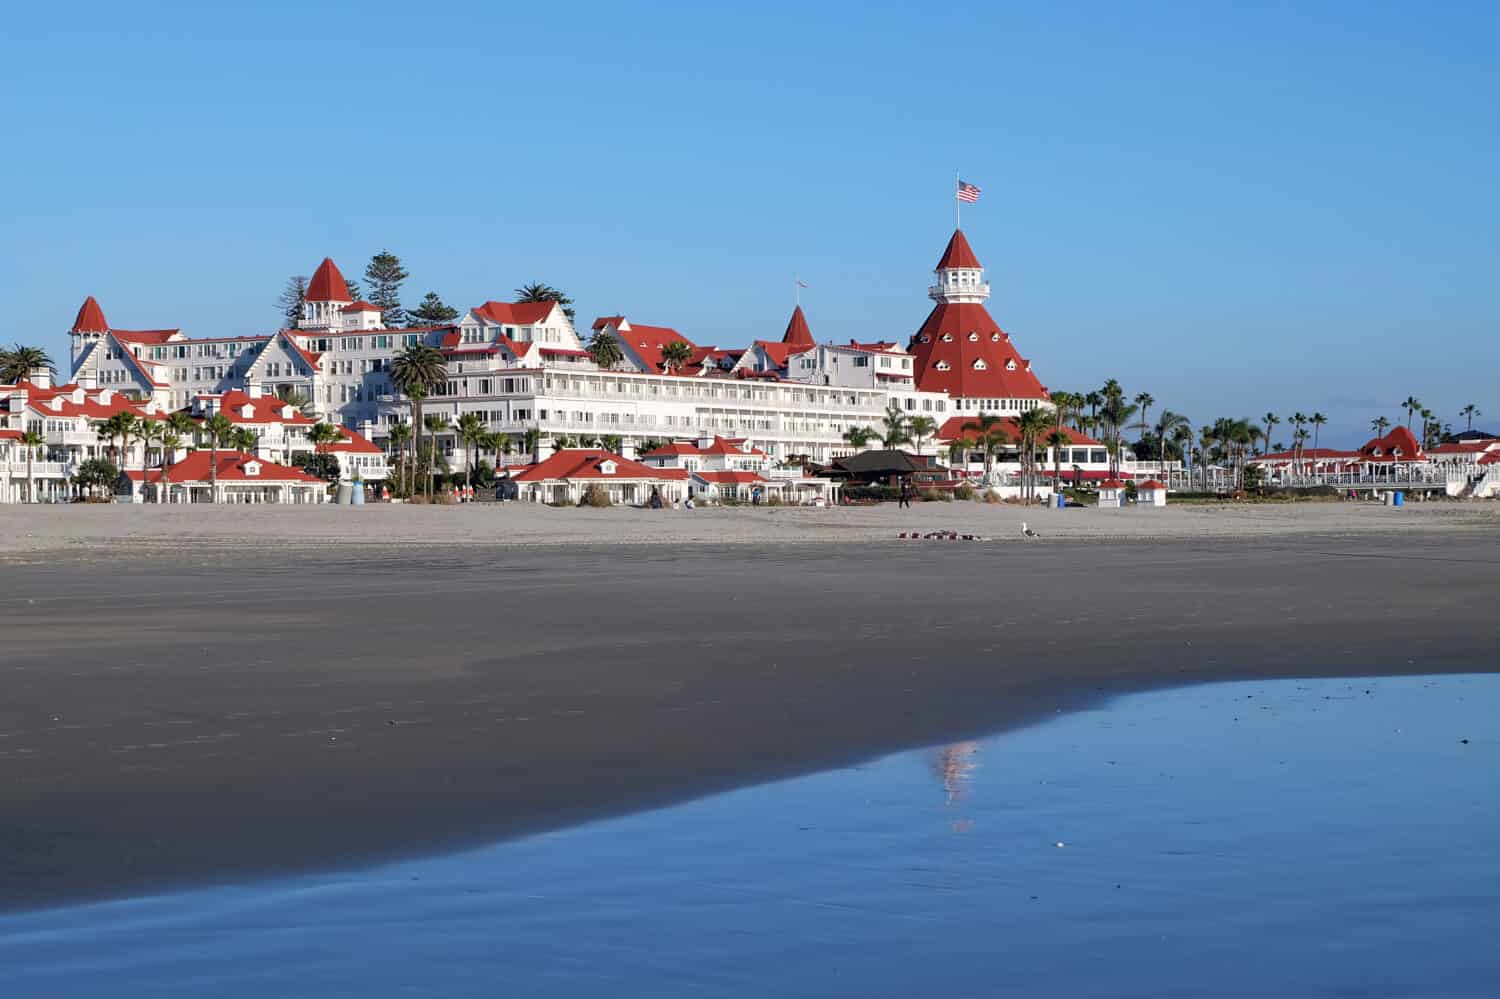 Victorian Hotel del Coronado where "Some like it hot" with Marilyn Monroe was filmed San Diego, California, United States